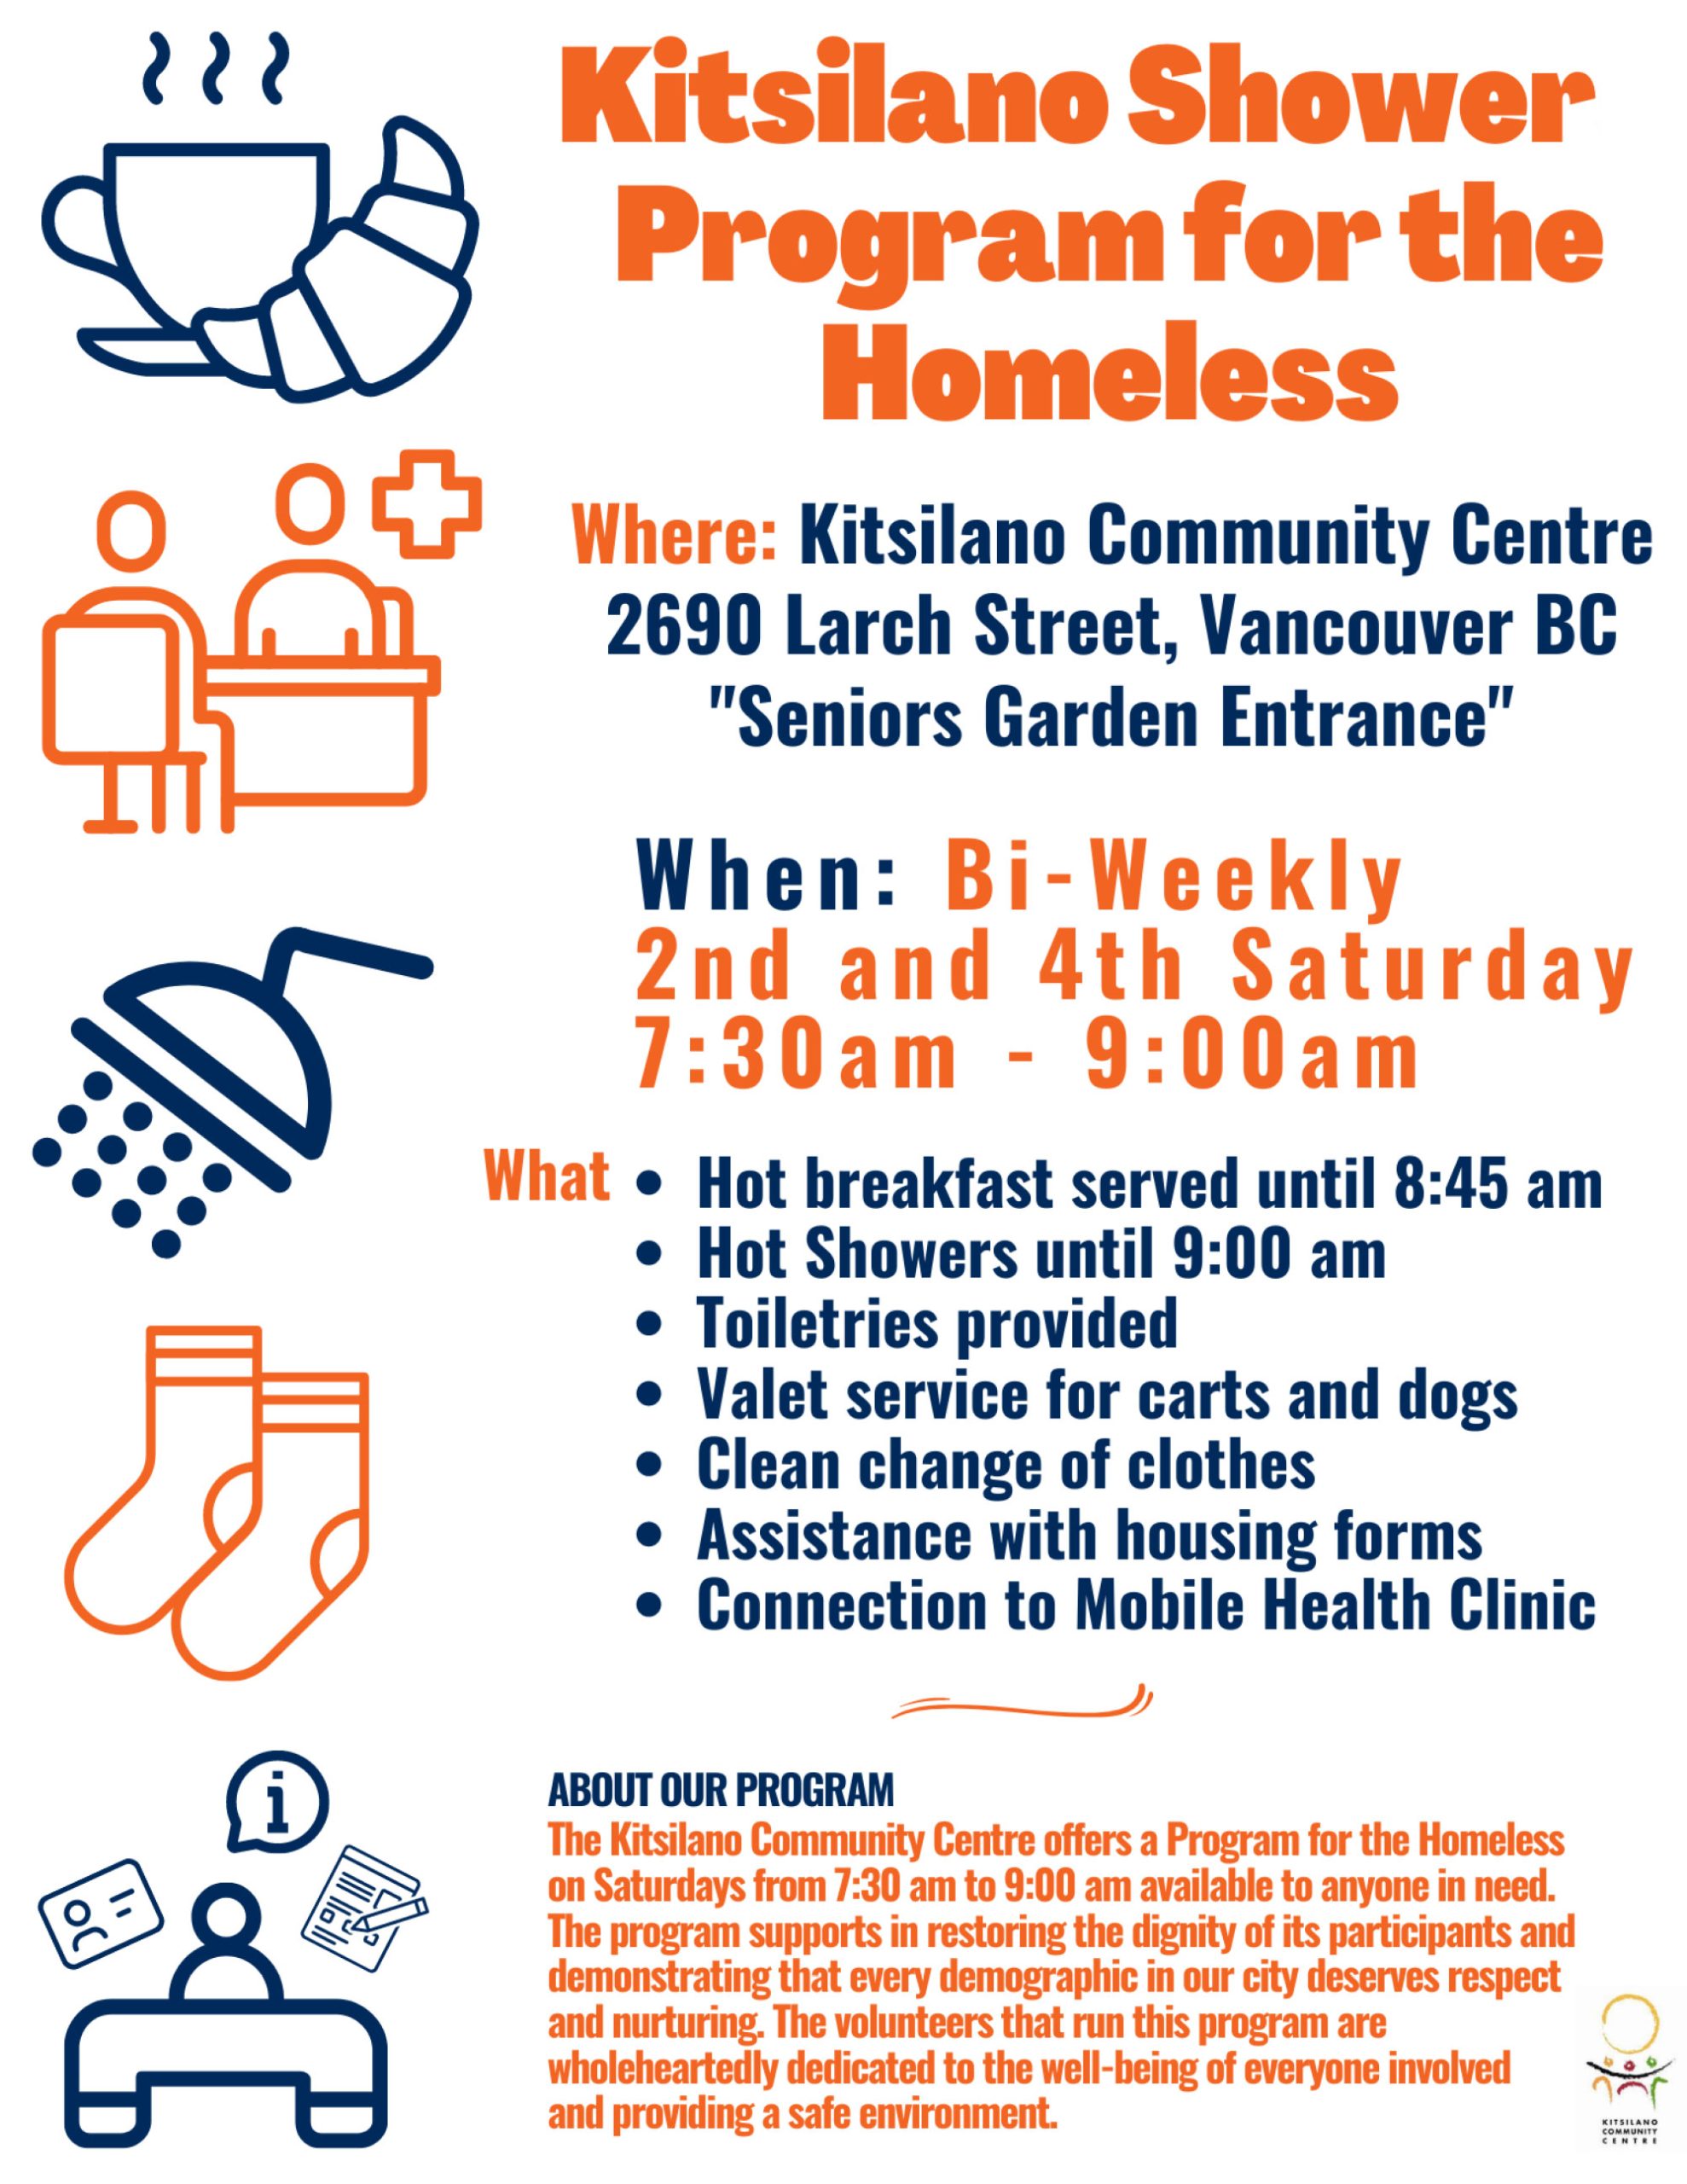 Kitsilano Showers Program for the Homeless Where: Kitsilano Community Centre 2690 Larch Street, Vancouver BC "Seniors Garden Entrance" When: Bi-Weekly 2nd and 4th Saturday 7:30am - 9:00am What •Hot breakfast served until 8:45 am •Hot Showers until 9:00 am •Toiletries provided •Valet service for carts and dogs •Clean change of clothes •Assistance with housing forms •Connection to Mobile Health Clinic ABOUT OUR PROGRAM The Kitsilano Community Centre offers a Program for the Homeless on Saturdays from 7:30 am to 9:00 am available to anyone inneed. The program supports inrestoring the dignity of its participants and demonstrating that every demographic inour city deserves respect and nurturing. The volunteers that run thisprogram are "' wholeheartedly dedicated to the well-being of everyone involved and providing a safe environment. 